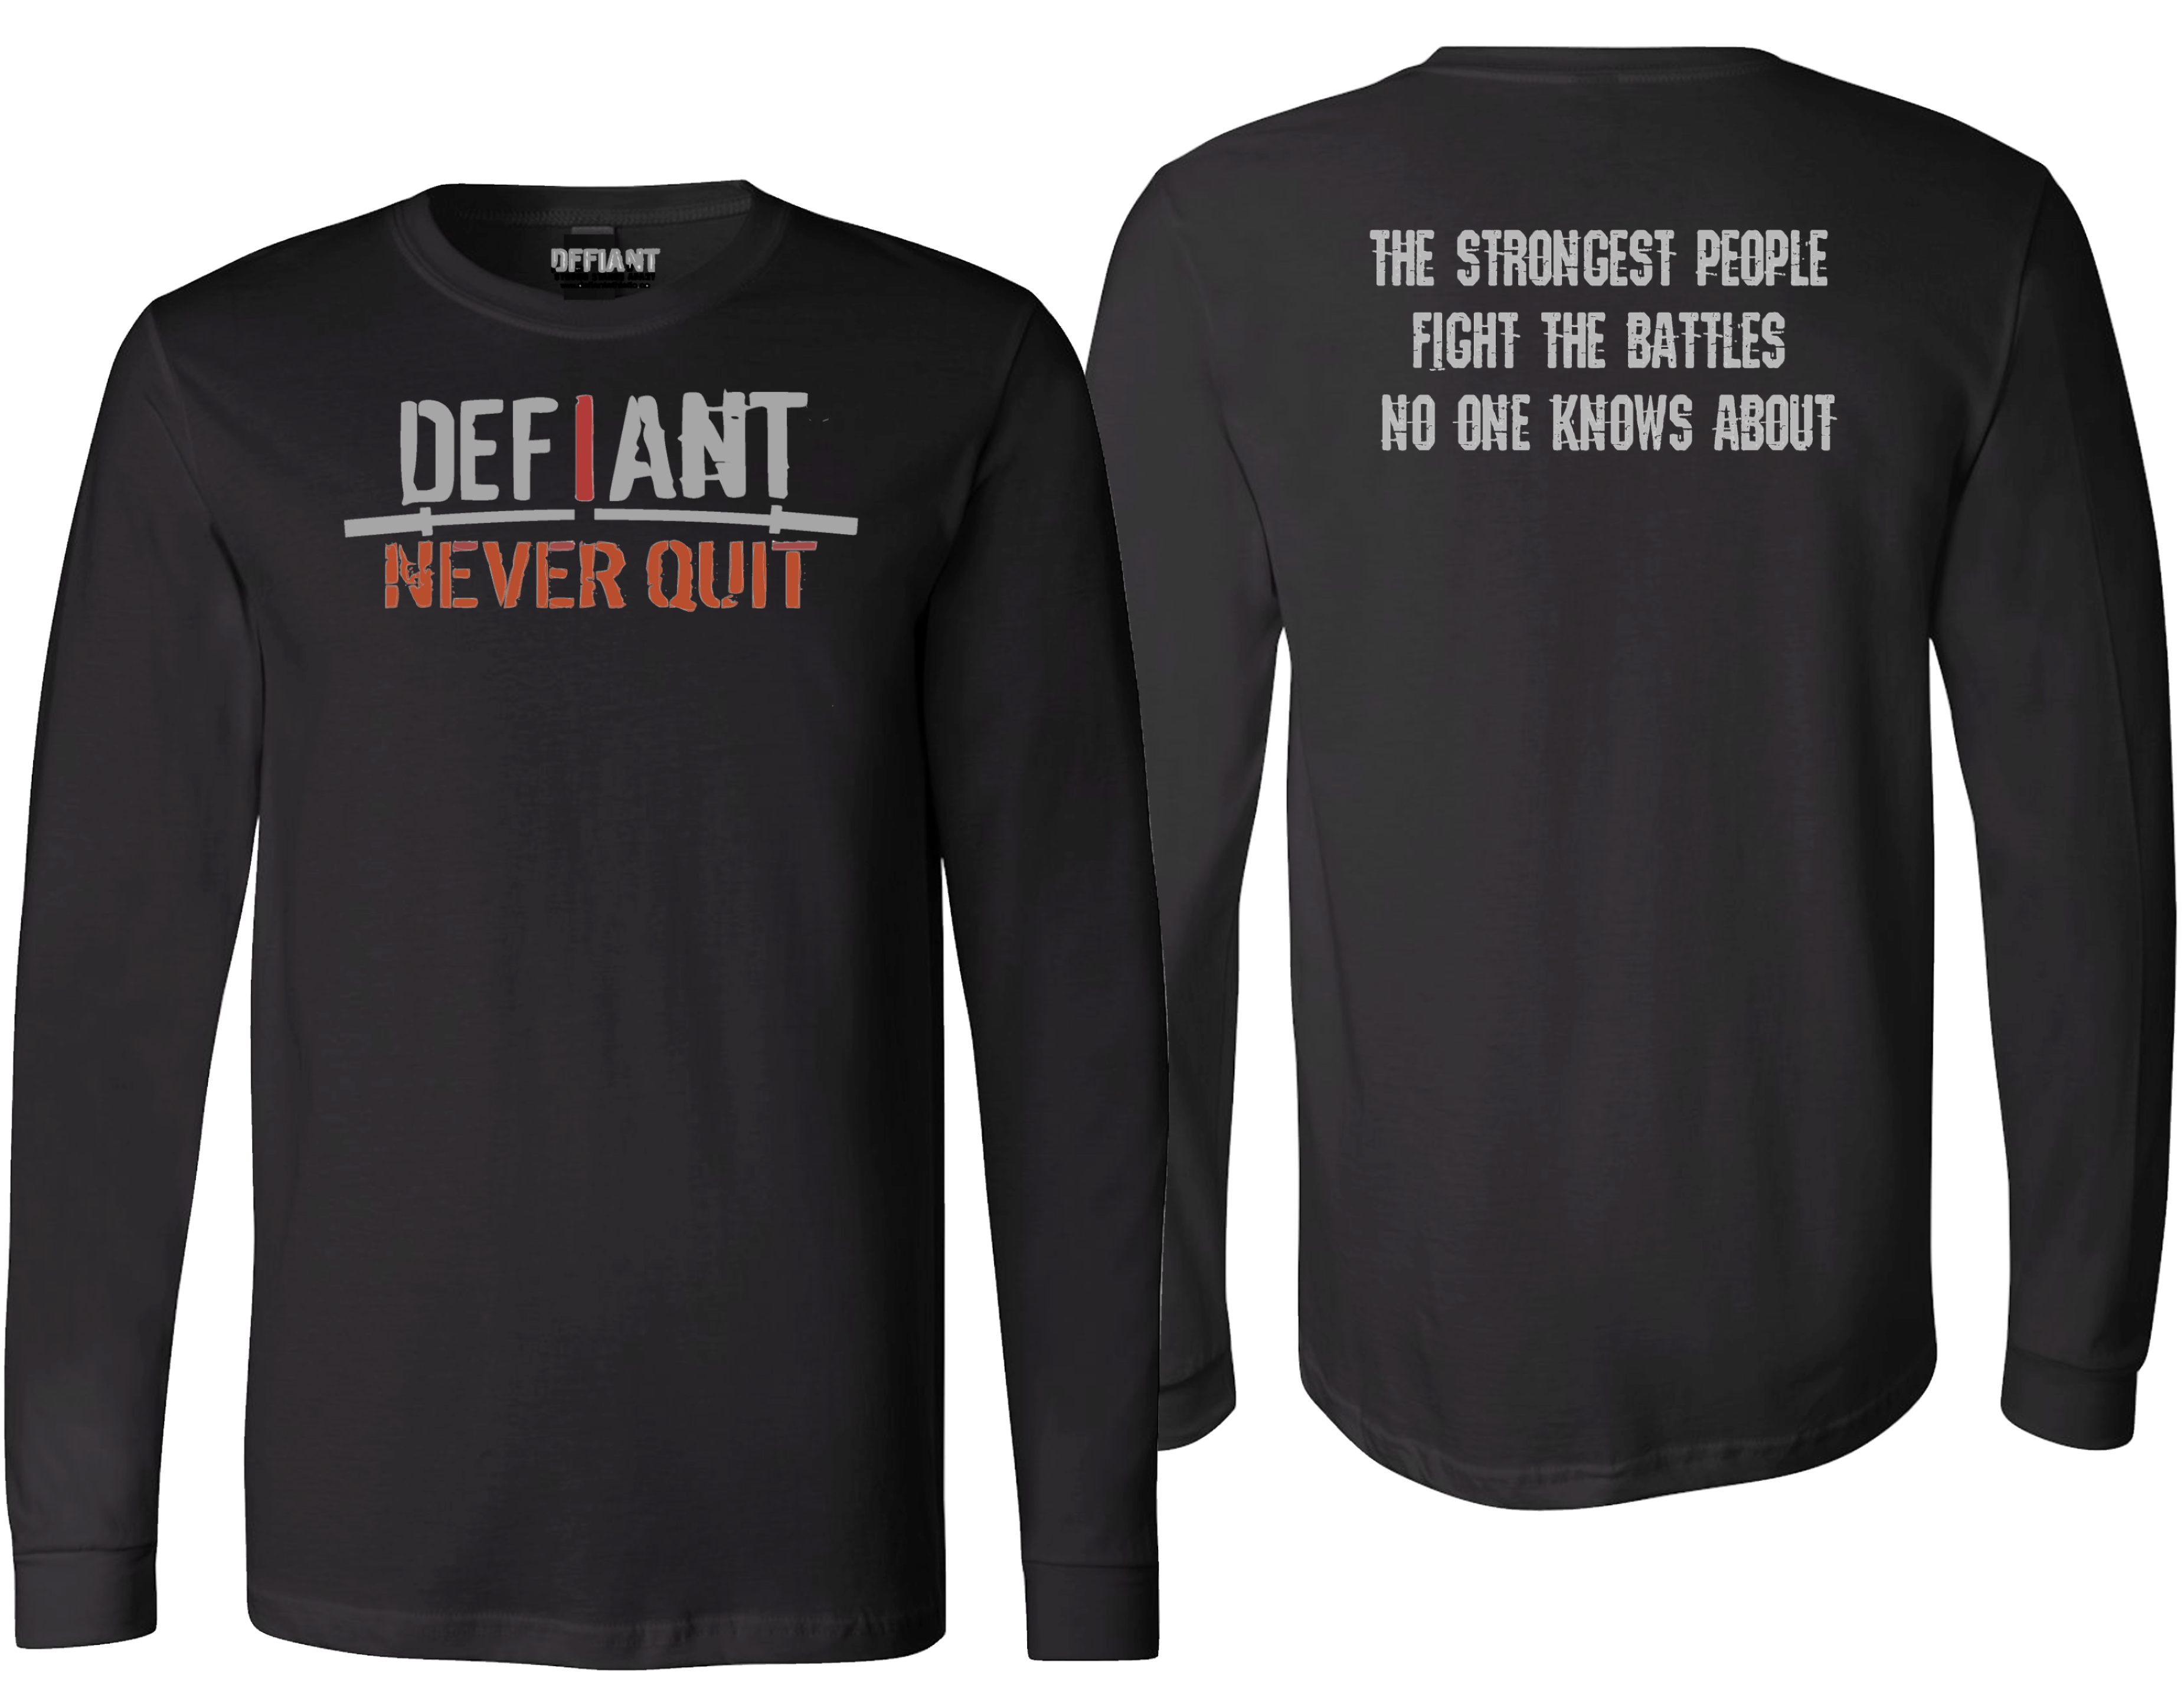 NEW - 2 COLOR - "I NEVER QUIT" - LONG SLEEVE T - LIMITED RUN